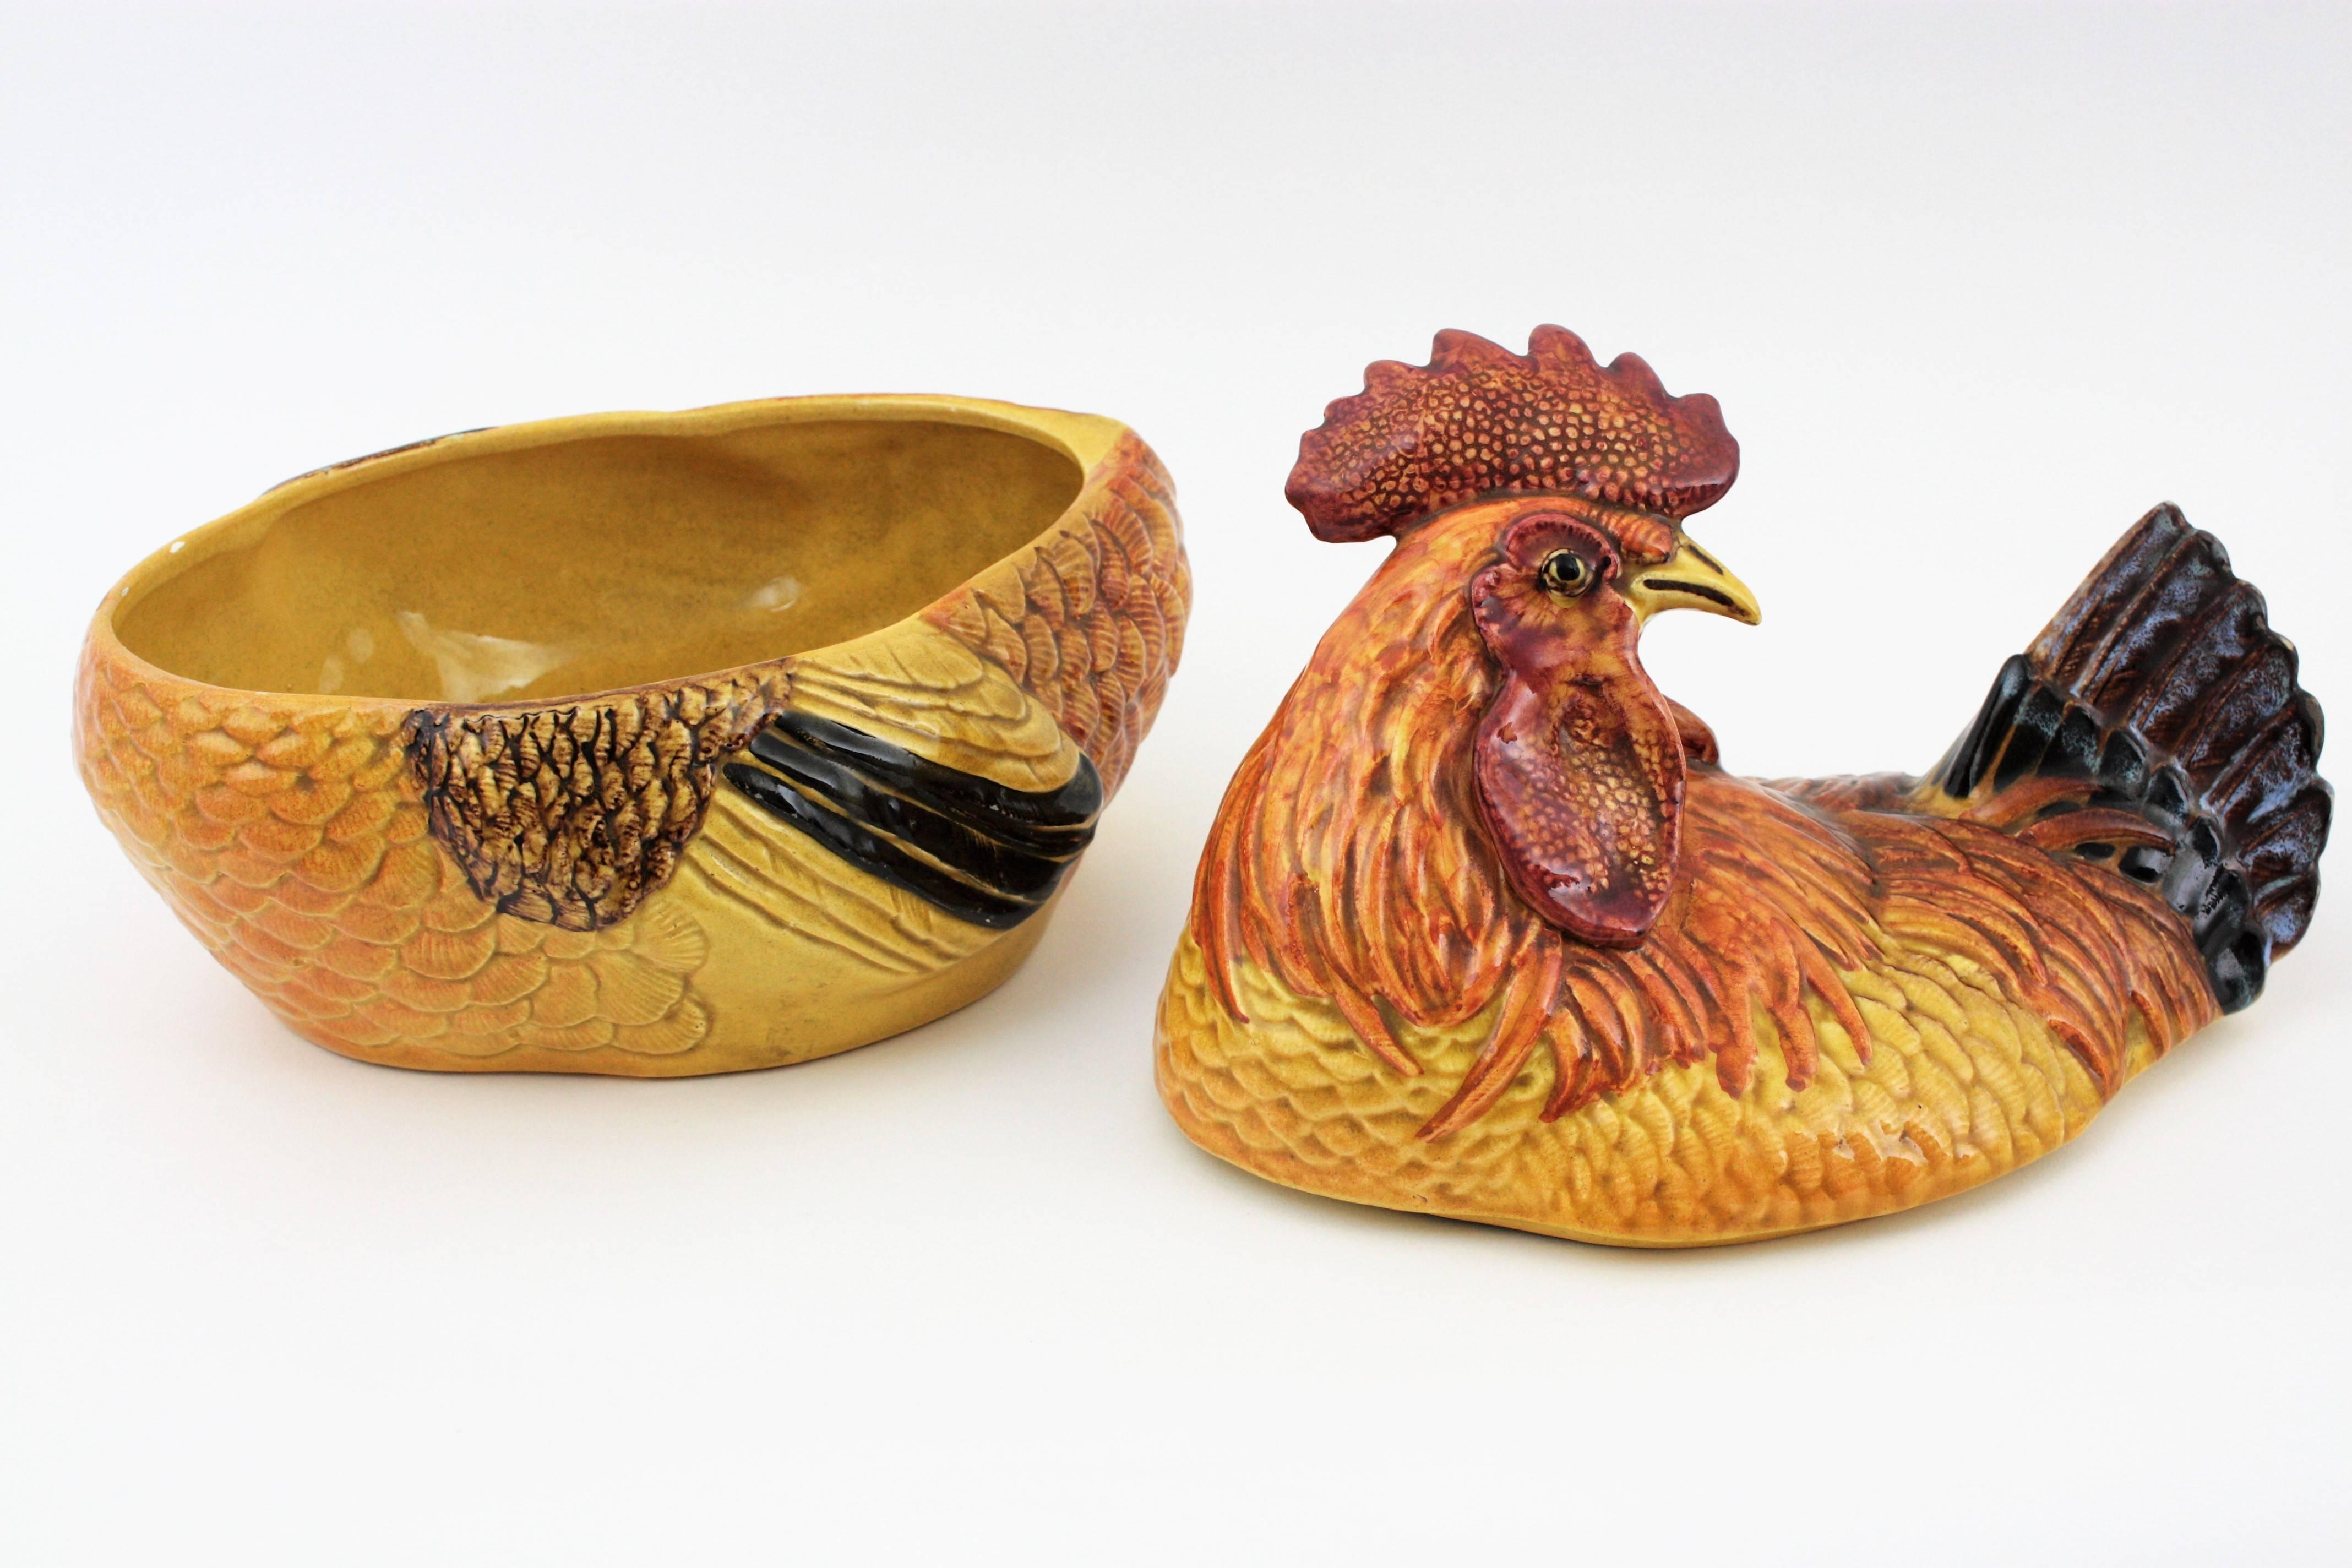 Eye-catching colorful hand painted glazed ceramic rooster shaped large tureen. Italy, 1950s.
The largest size in this kind of tureens or egg containers. 
This amazing and colorful hand painted glazed ceramic hen tureen in yellow, orange and red